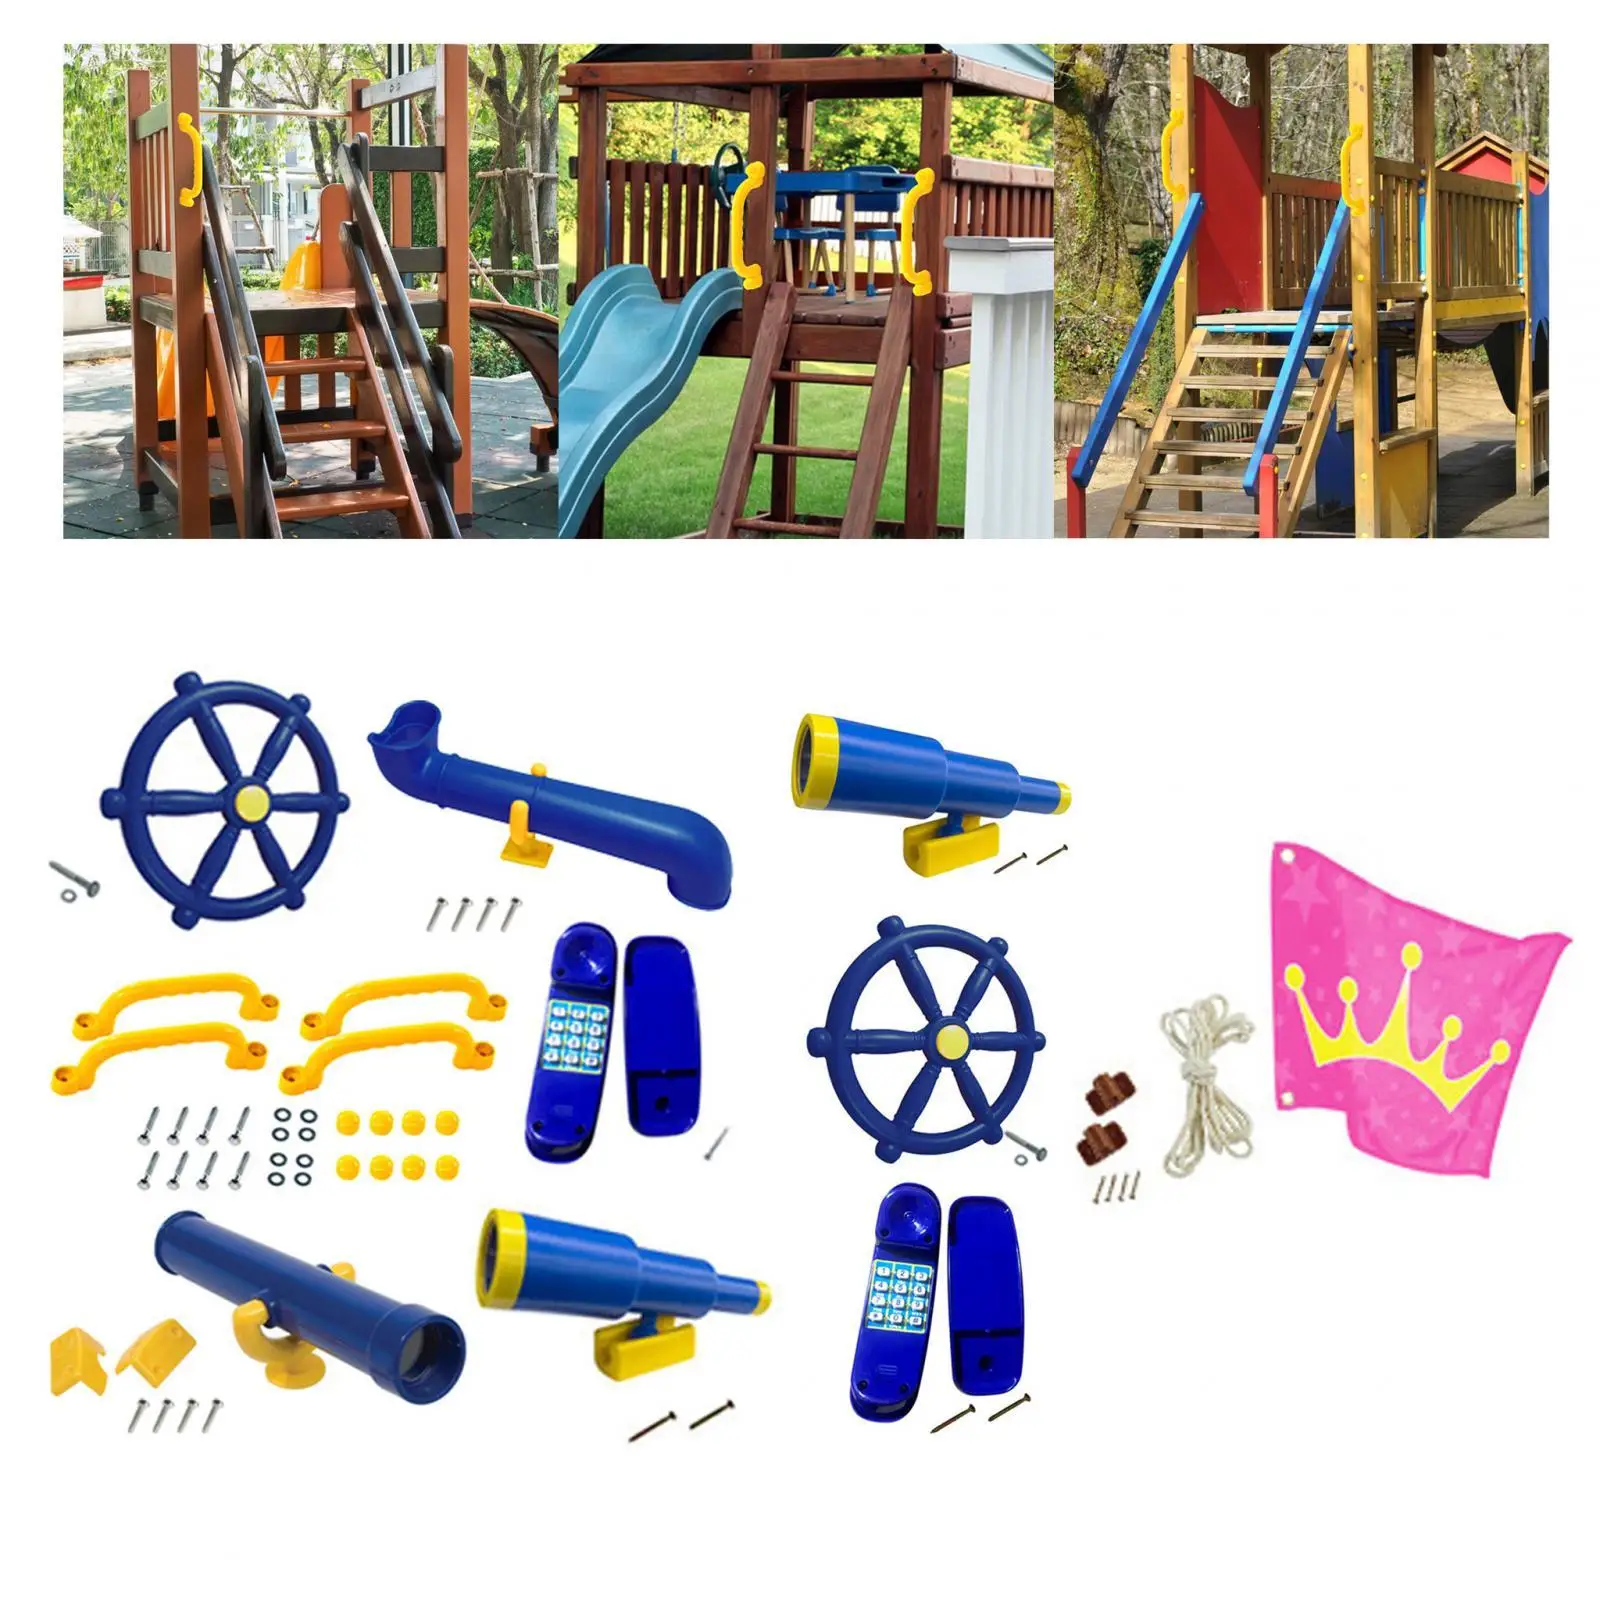 Playground Accessories Sports Toy Accessories Swing Set Attachments for Backyard Play House Treehouse Outdoor Swingset